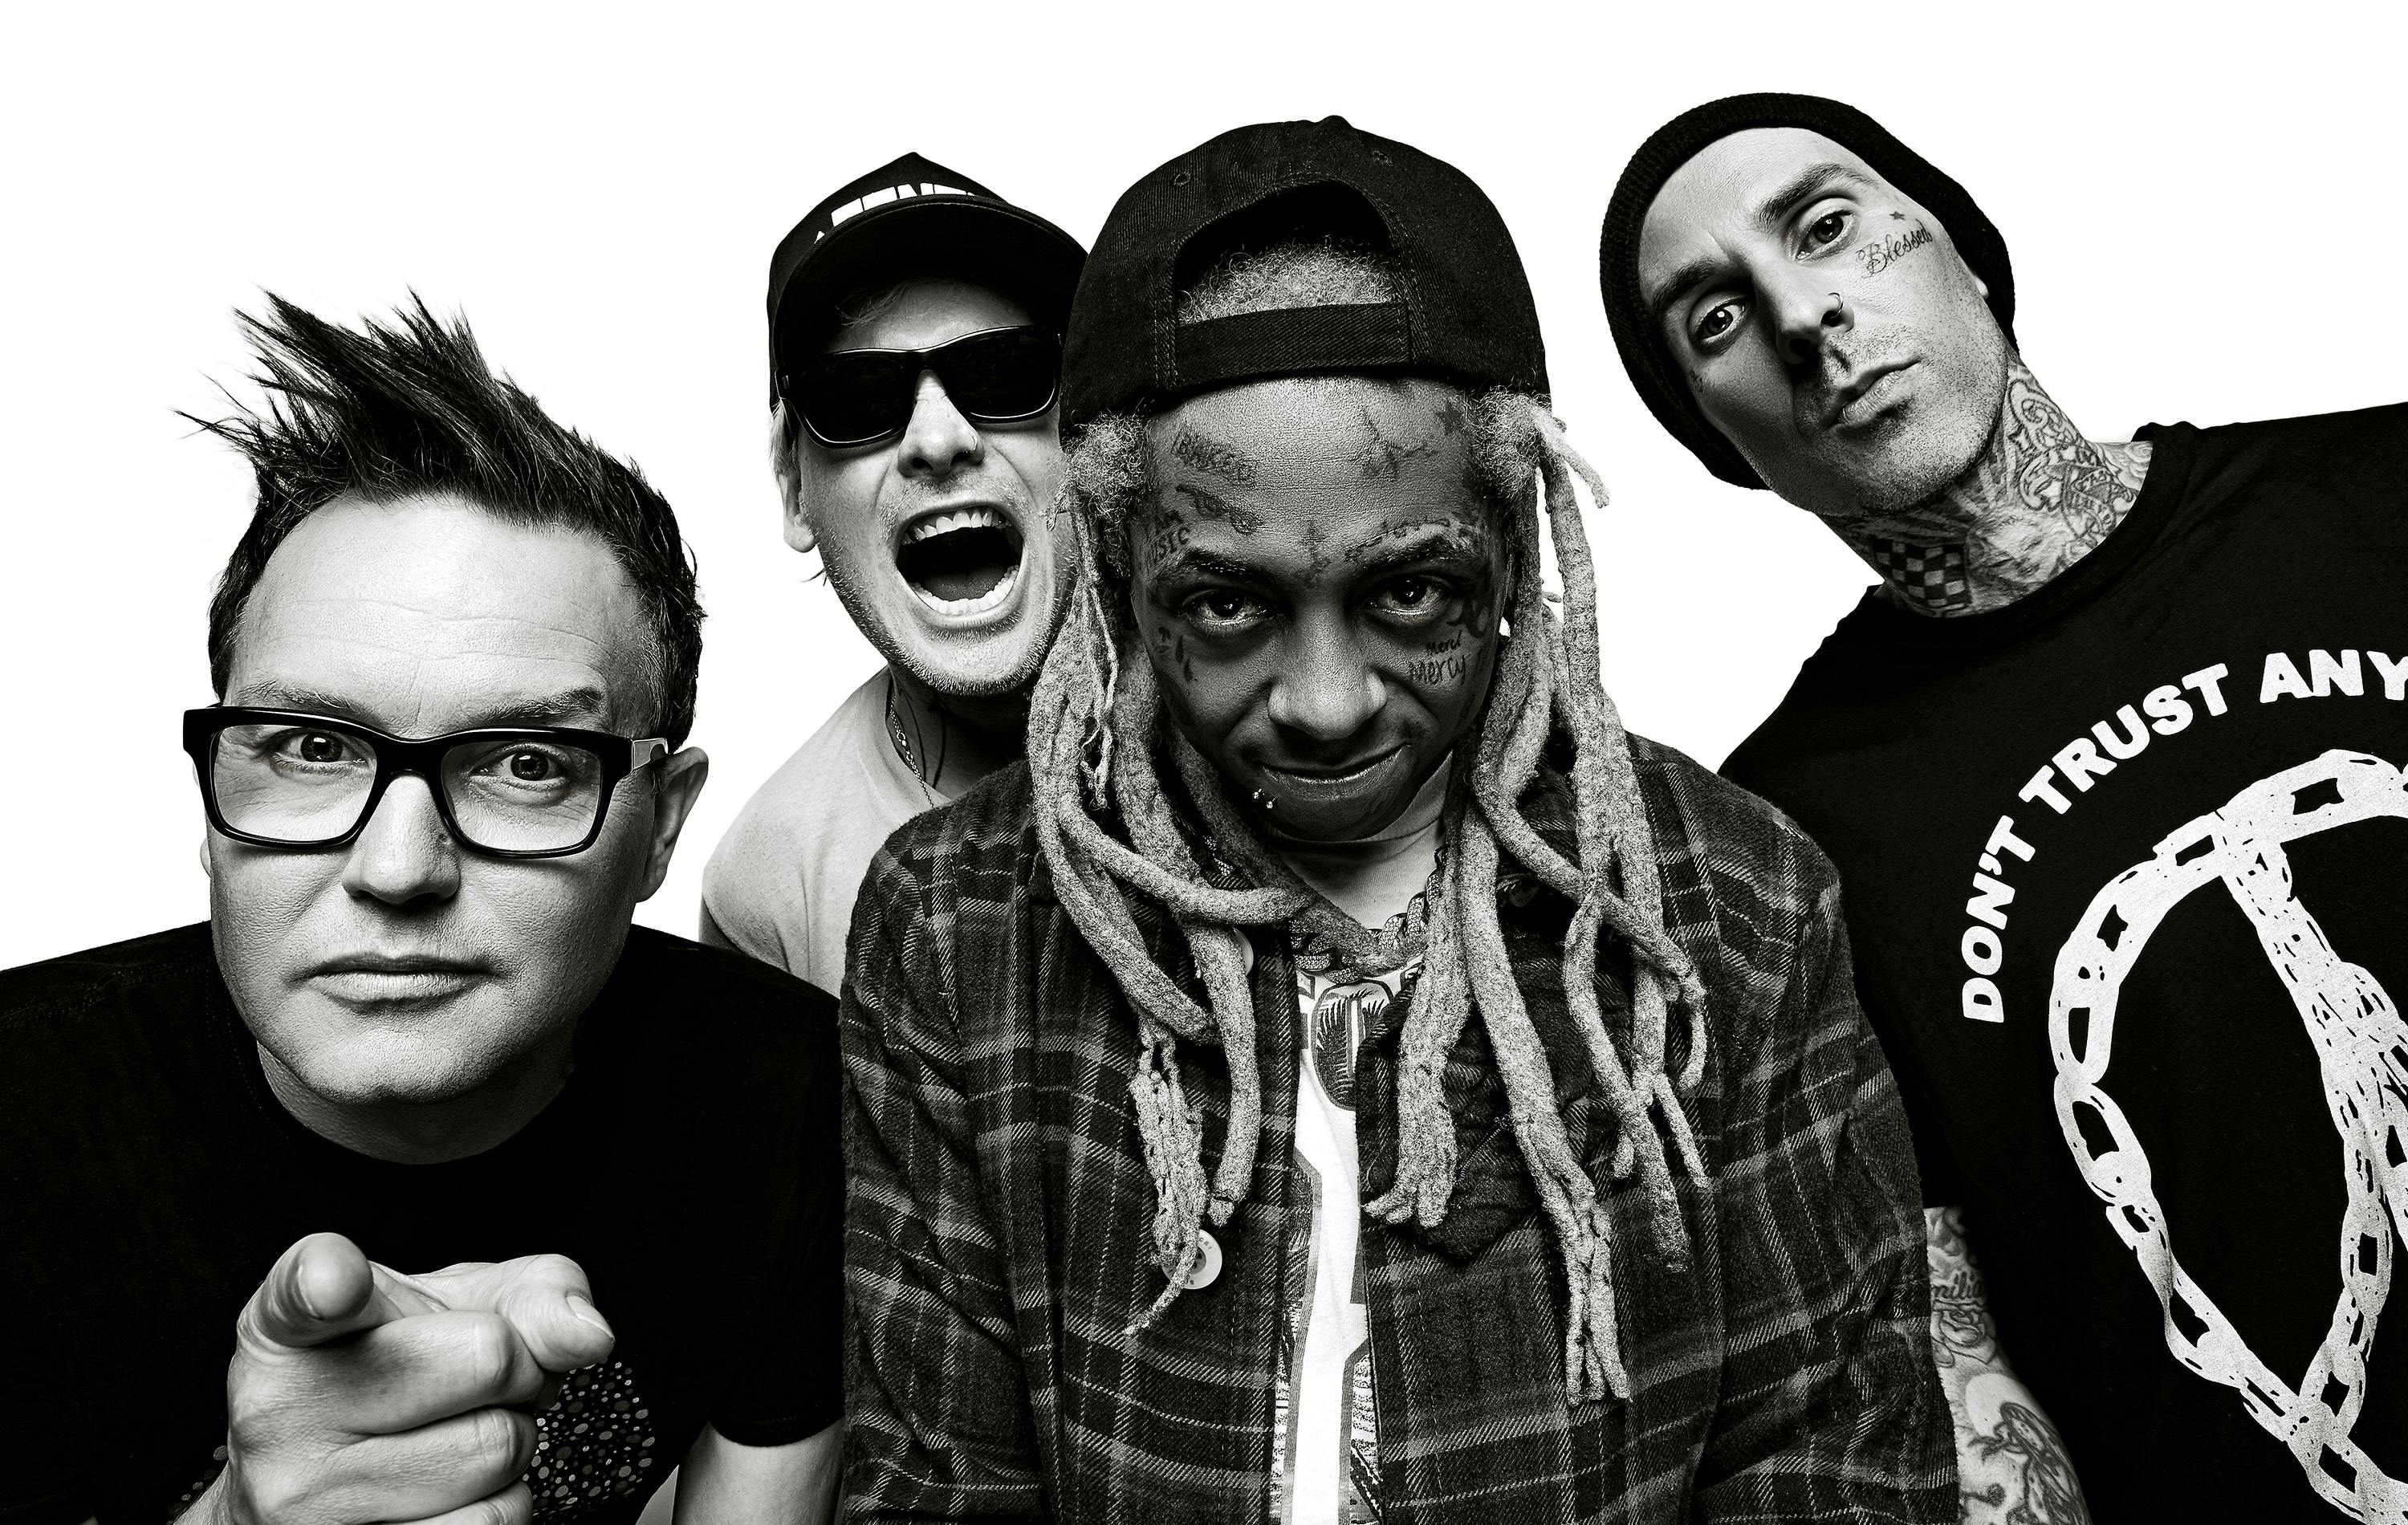 blink-182 Announce Co-Headlining Tour With Lil Wayne